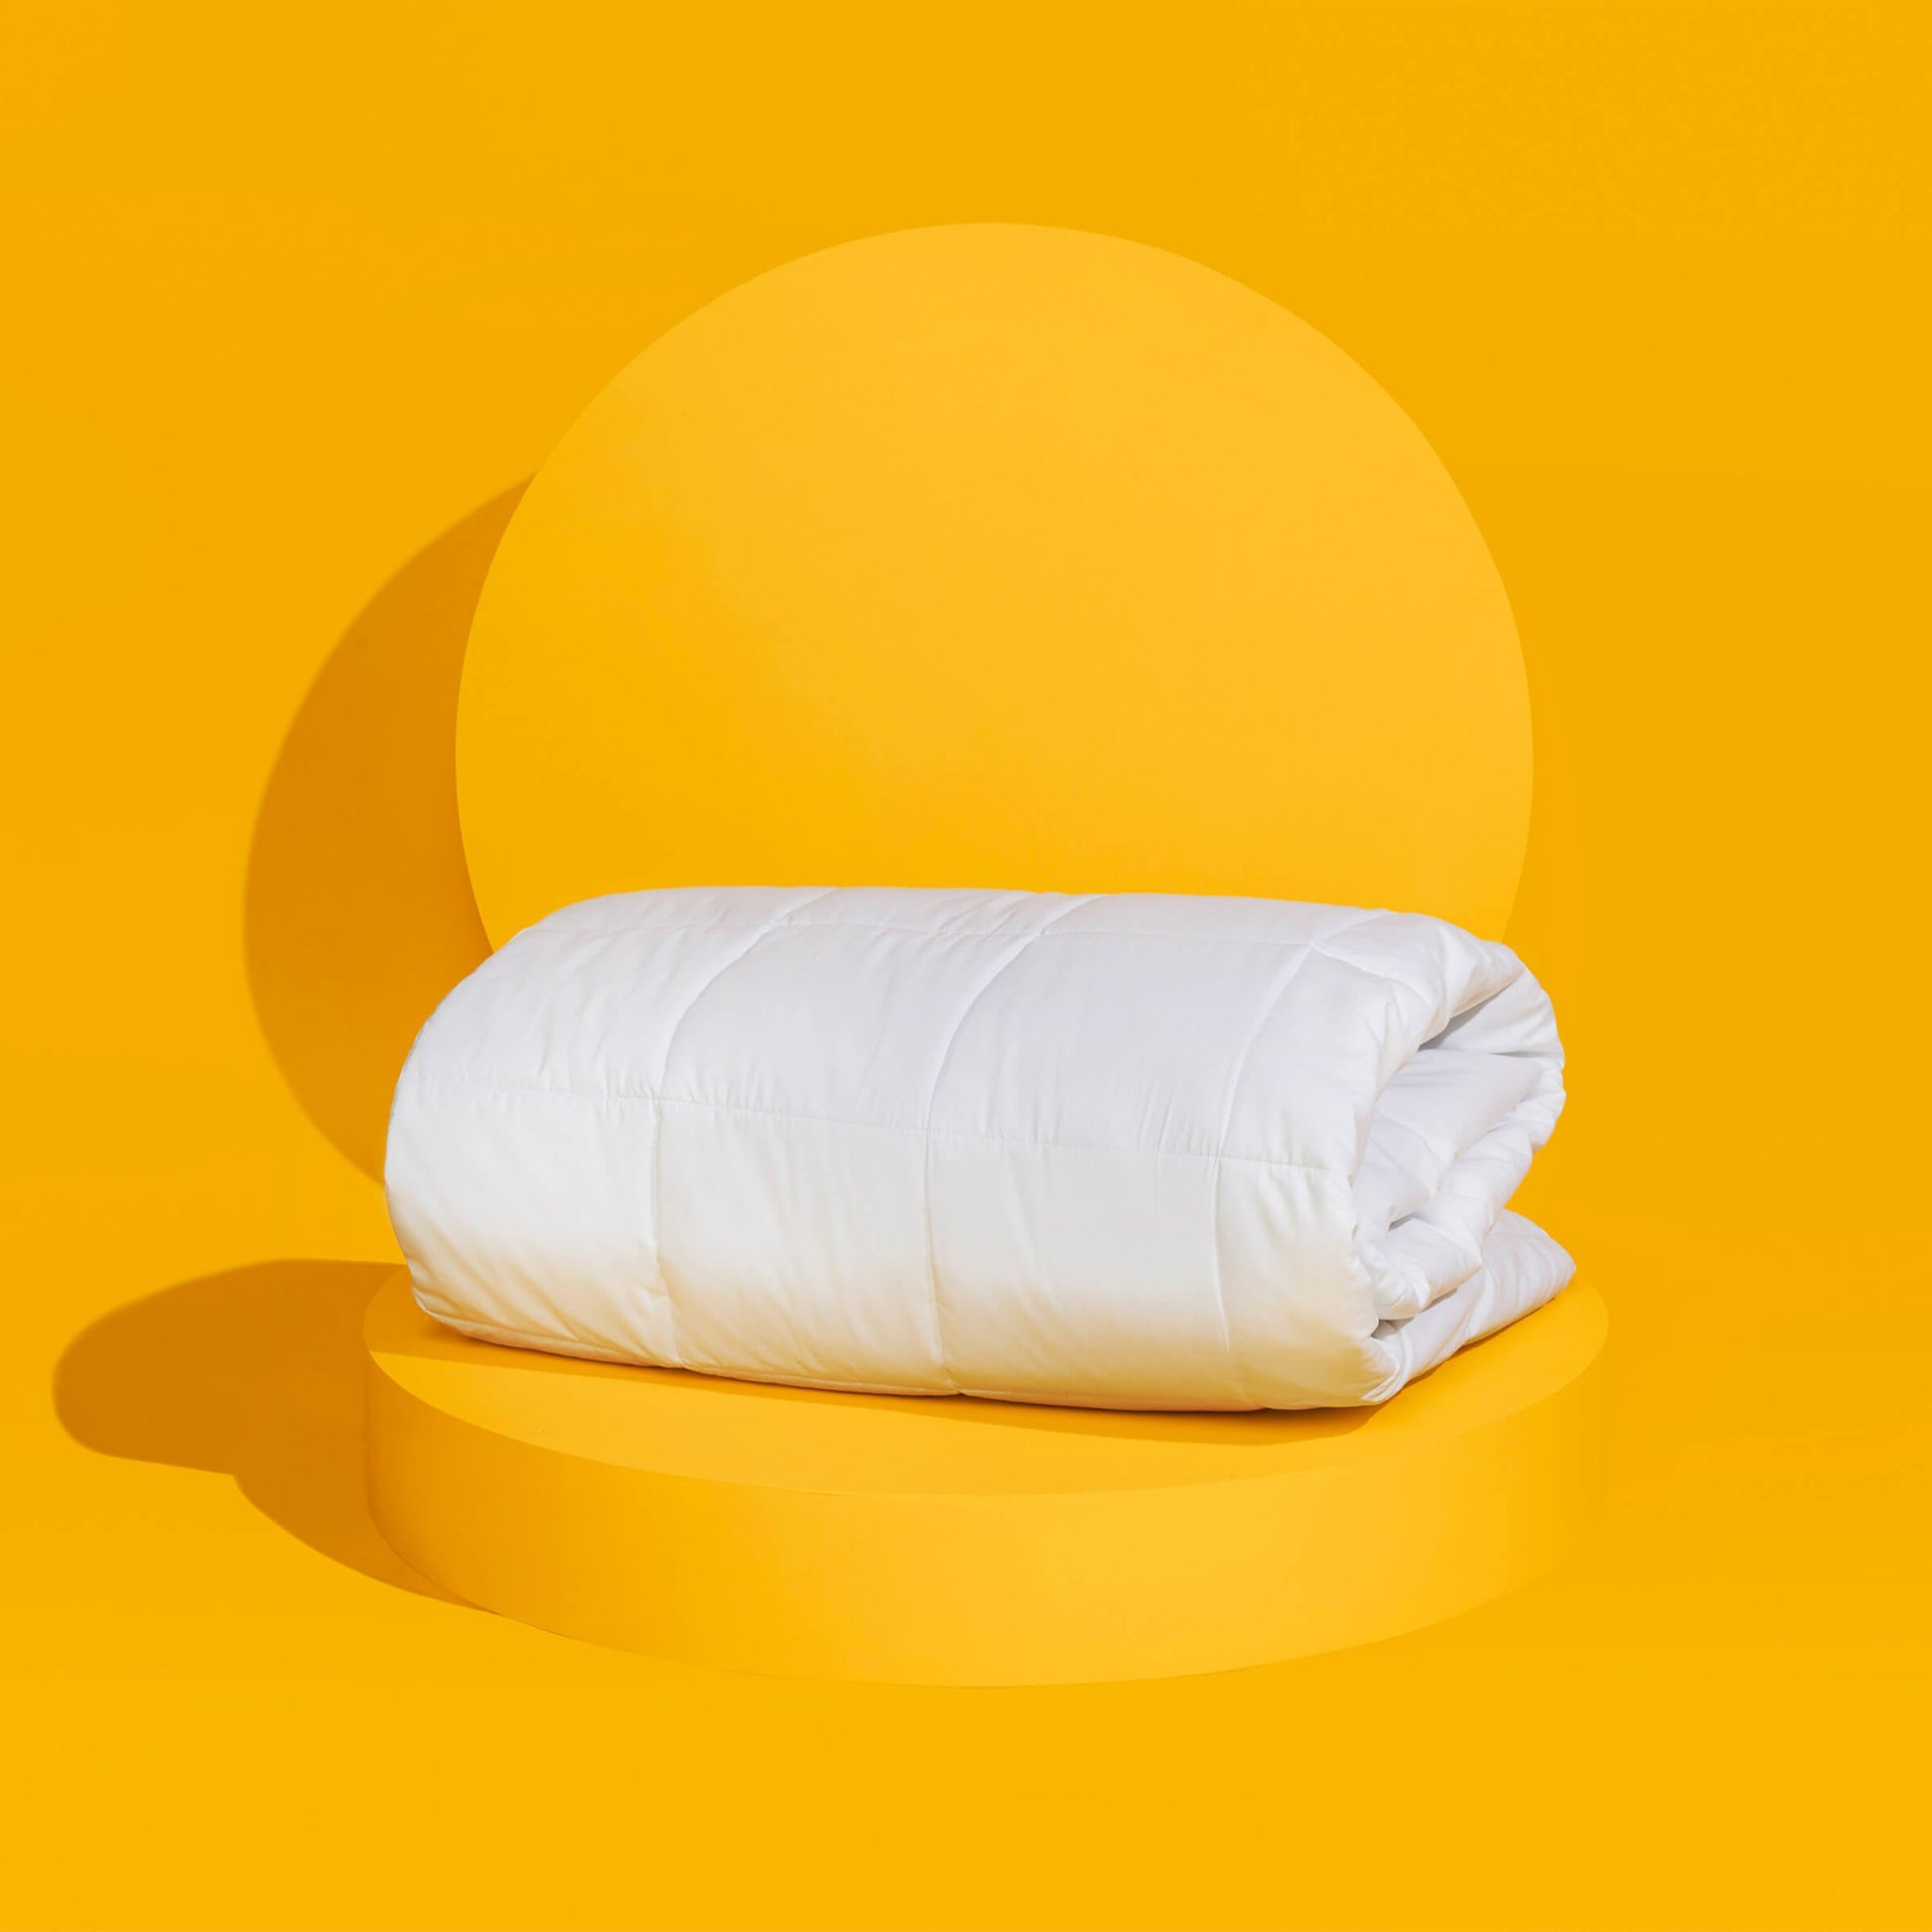 The temperature regulating Core Mattress Pad from Slumber Cloud propped on a yellow background